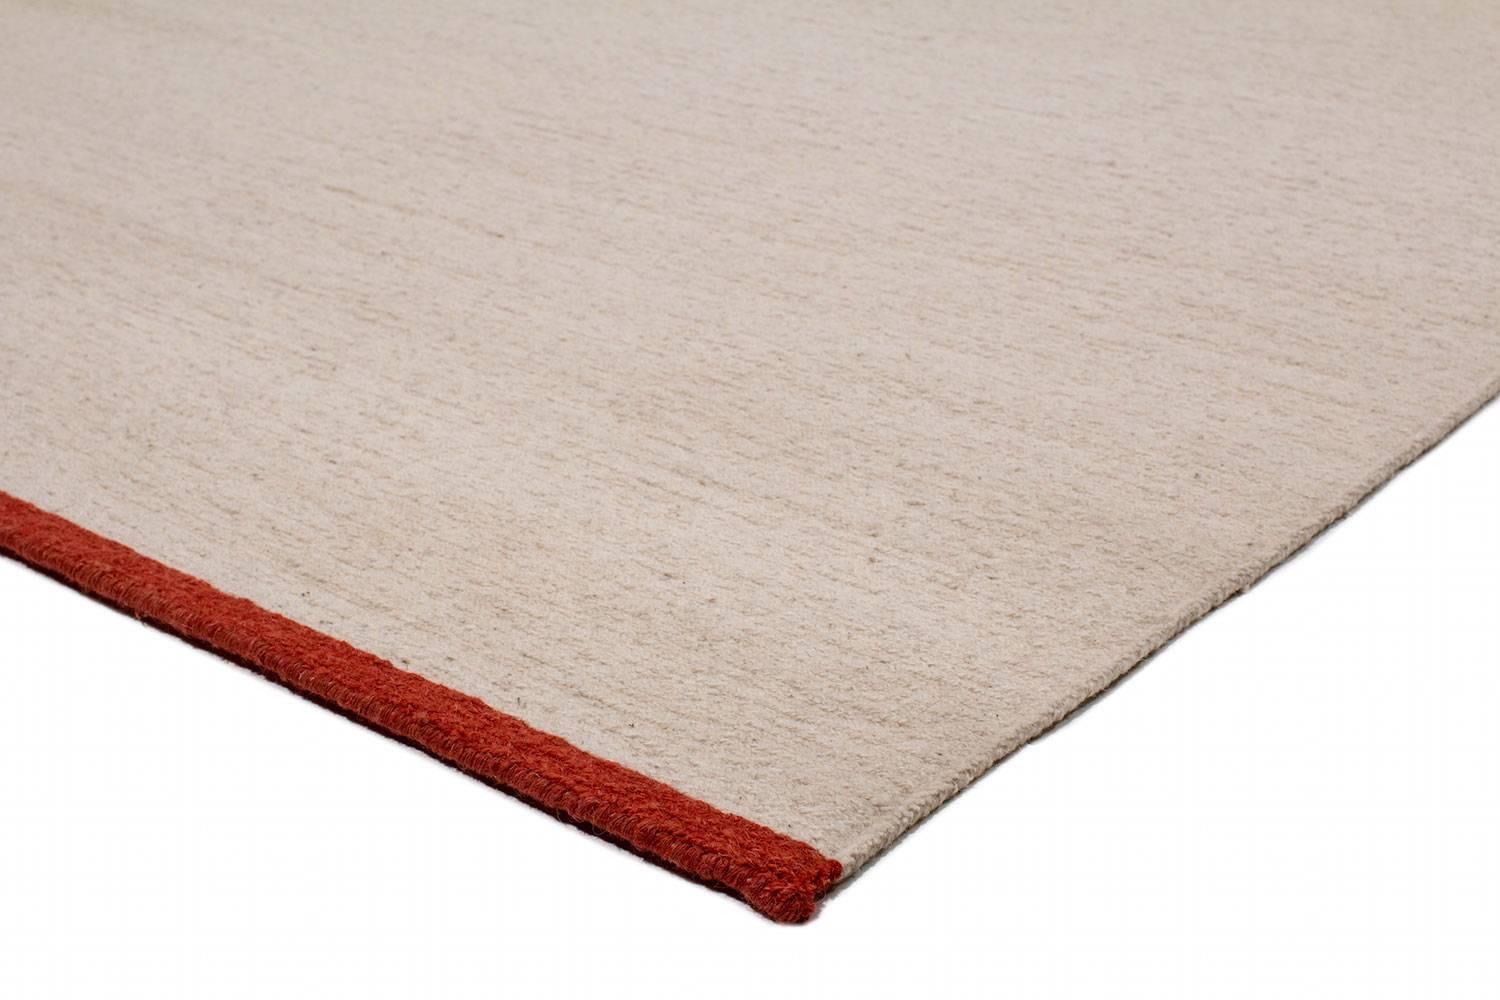 Organic Modern Natural White Wool Rug with Red Accent Stripe